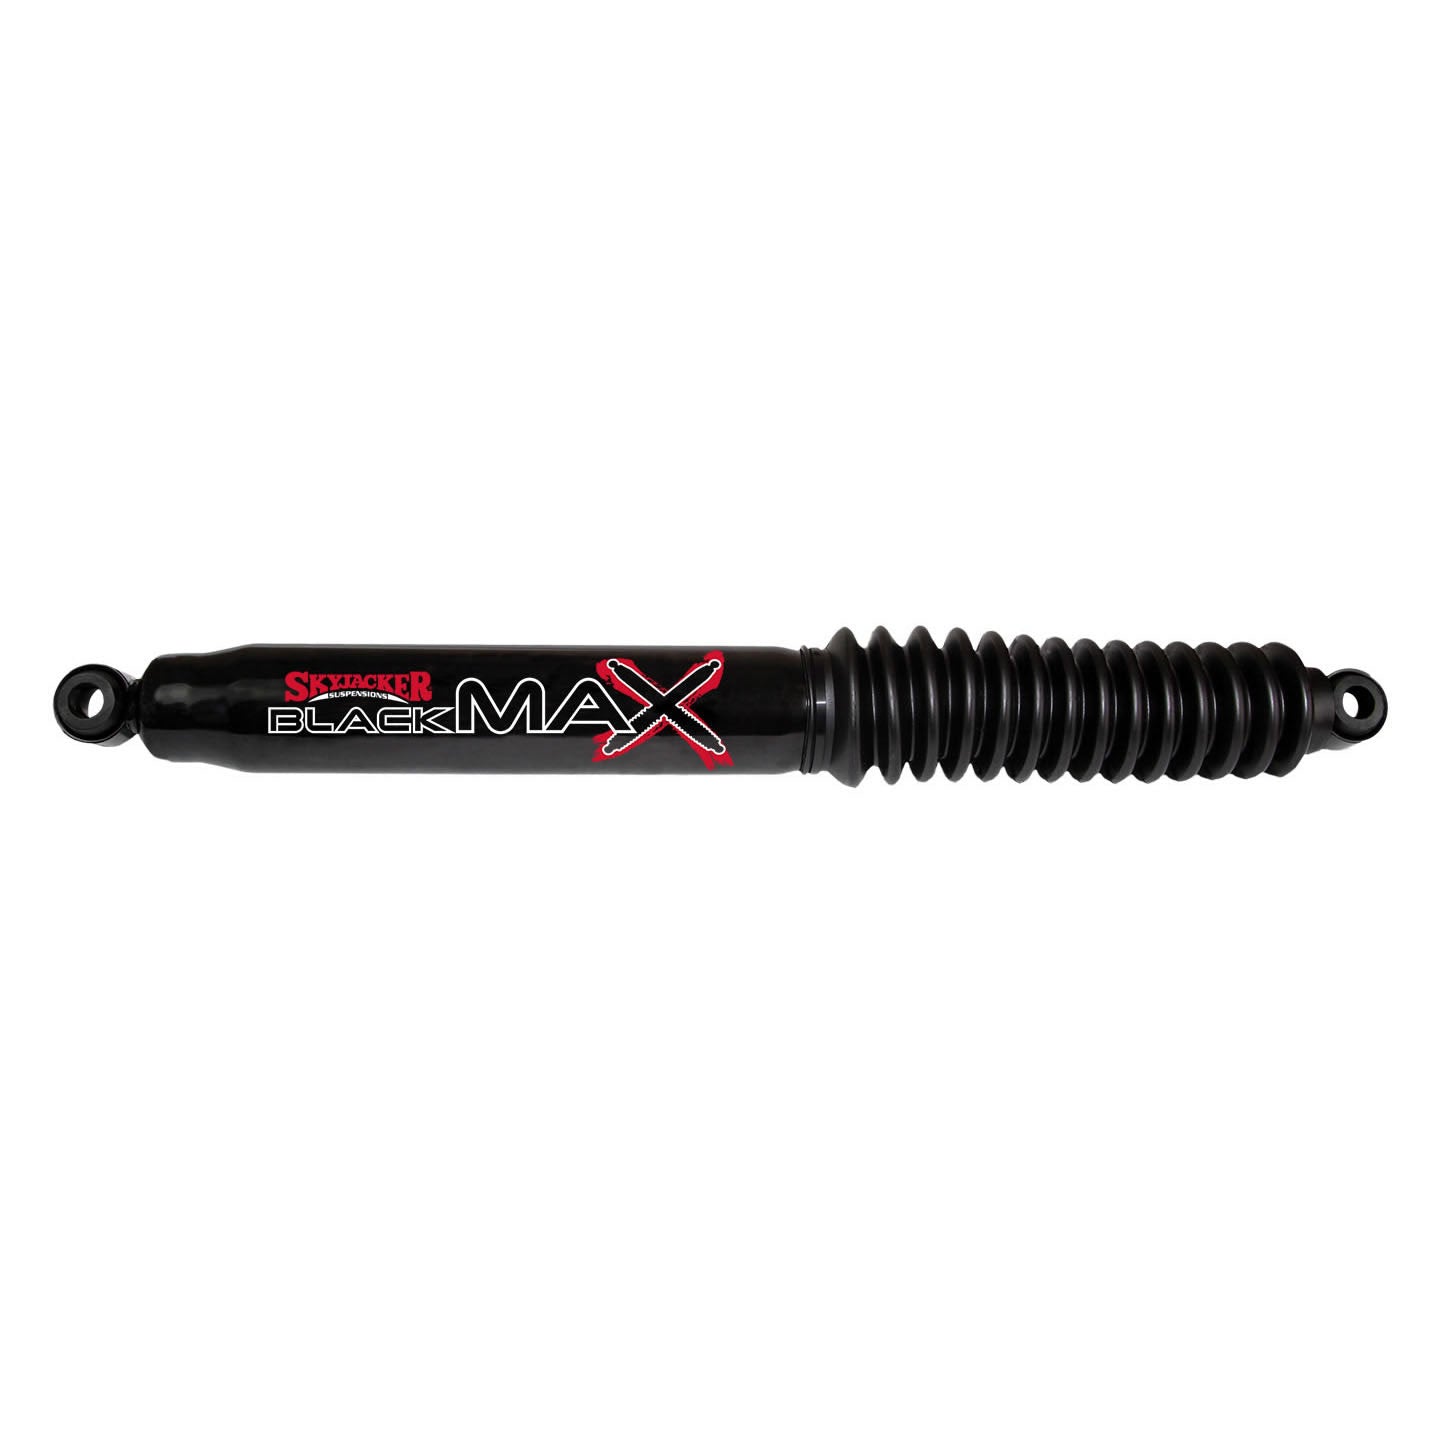 Black MAX Shock Absorber Dodge/Ford w/Black Boot 29.83 Inch Extended 17.32 Inch Collapsed Skyjacker